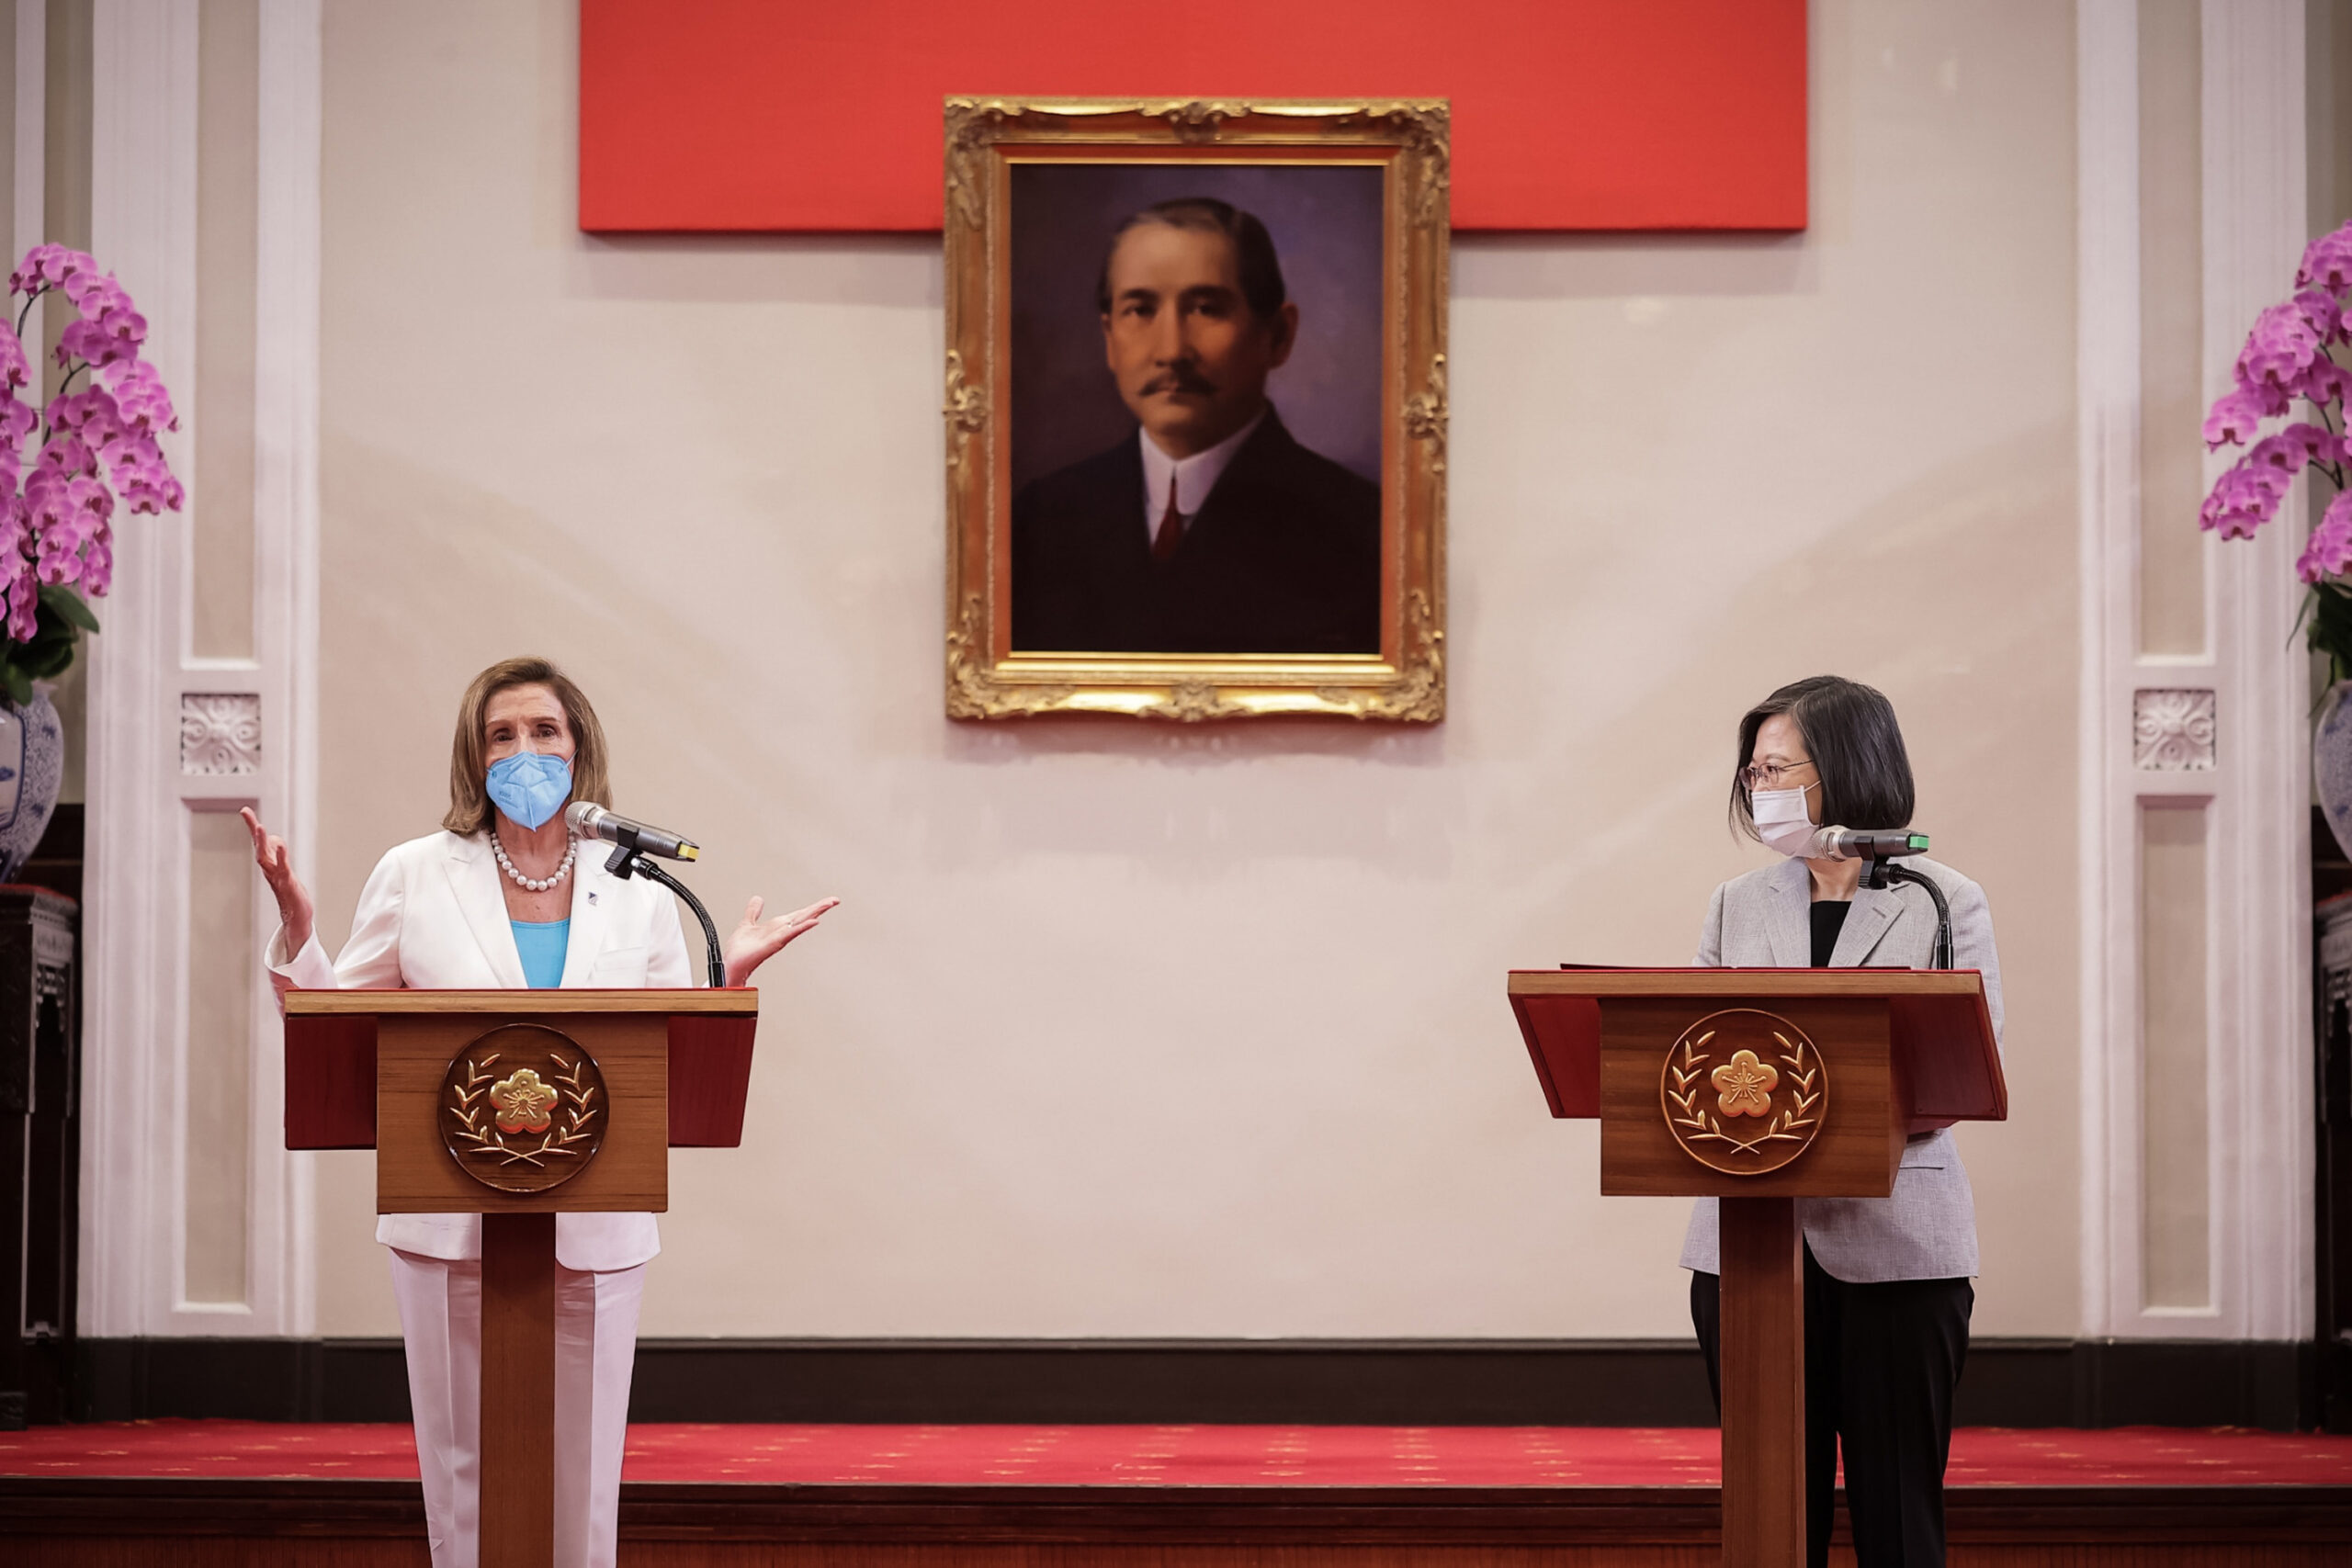 Pelosi discussing china relations with taiwan